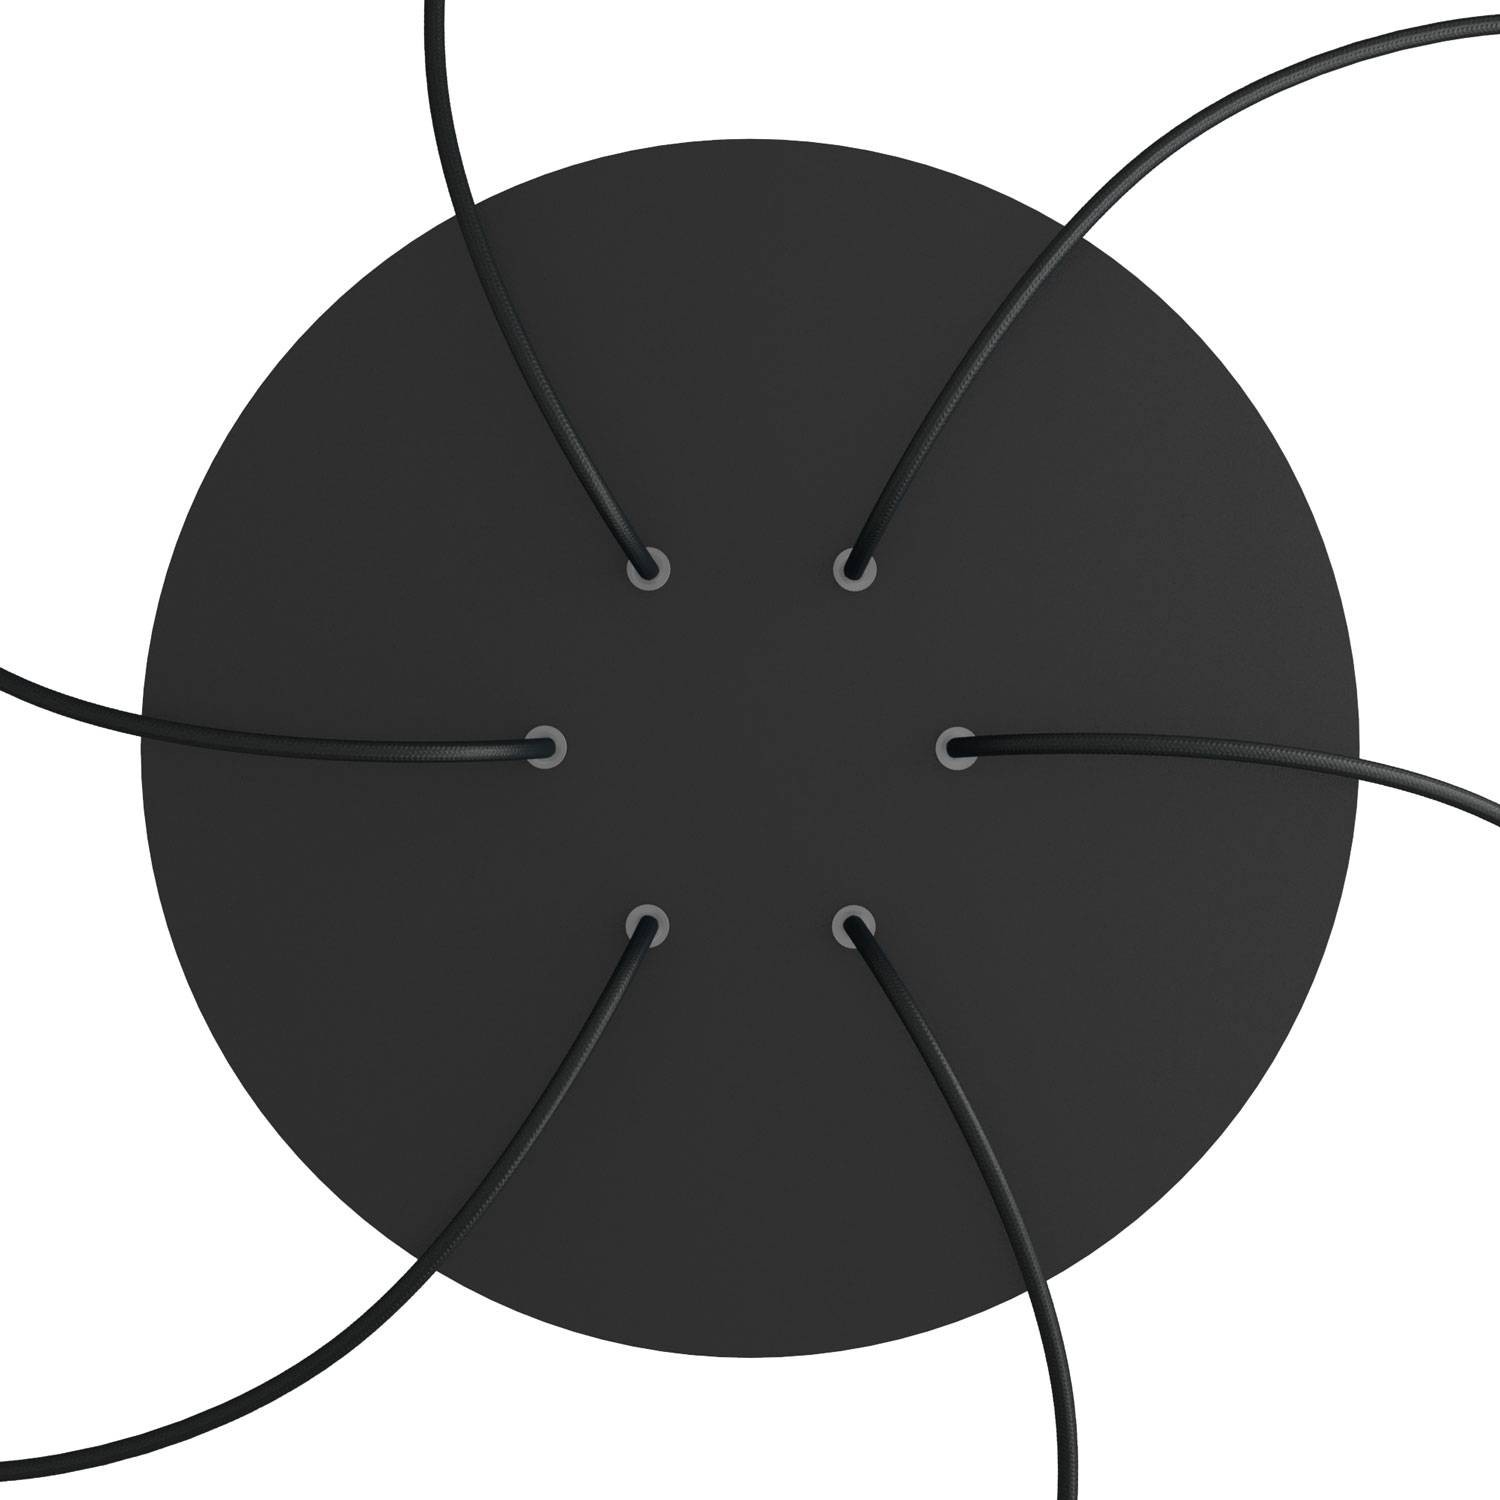 6 Holes - EXTRA LARGE Round Ceiling Canopy Kit - Rose One System